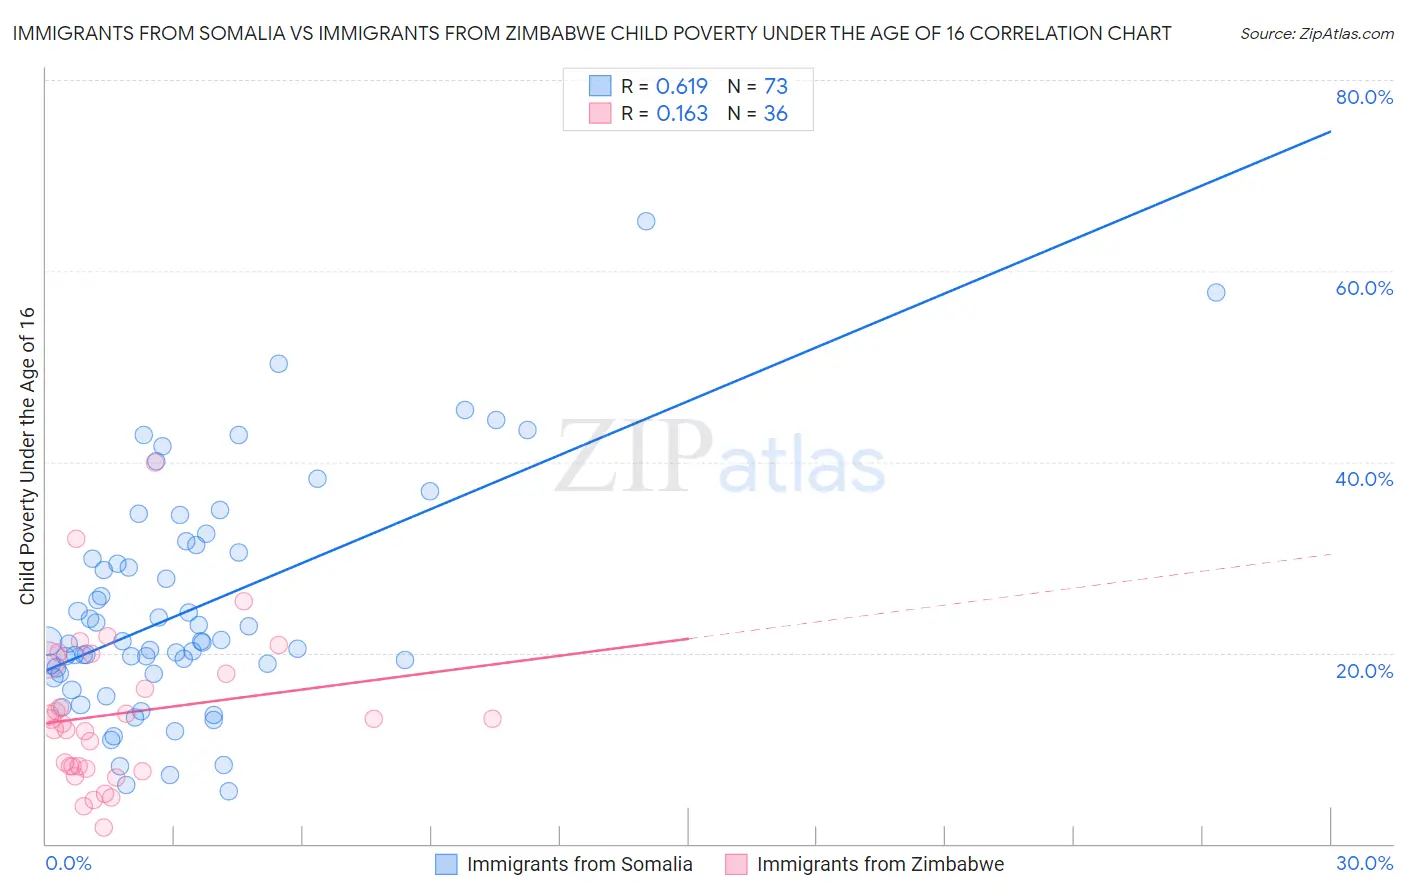 Immigrants from Somalia vs Immigrants from Zimbabwe Child Poverty Under the Age of 16